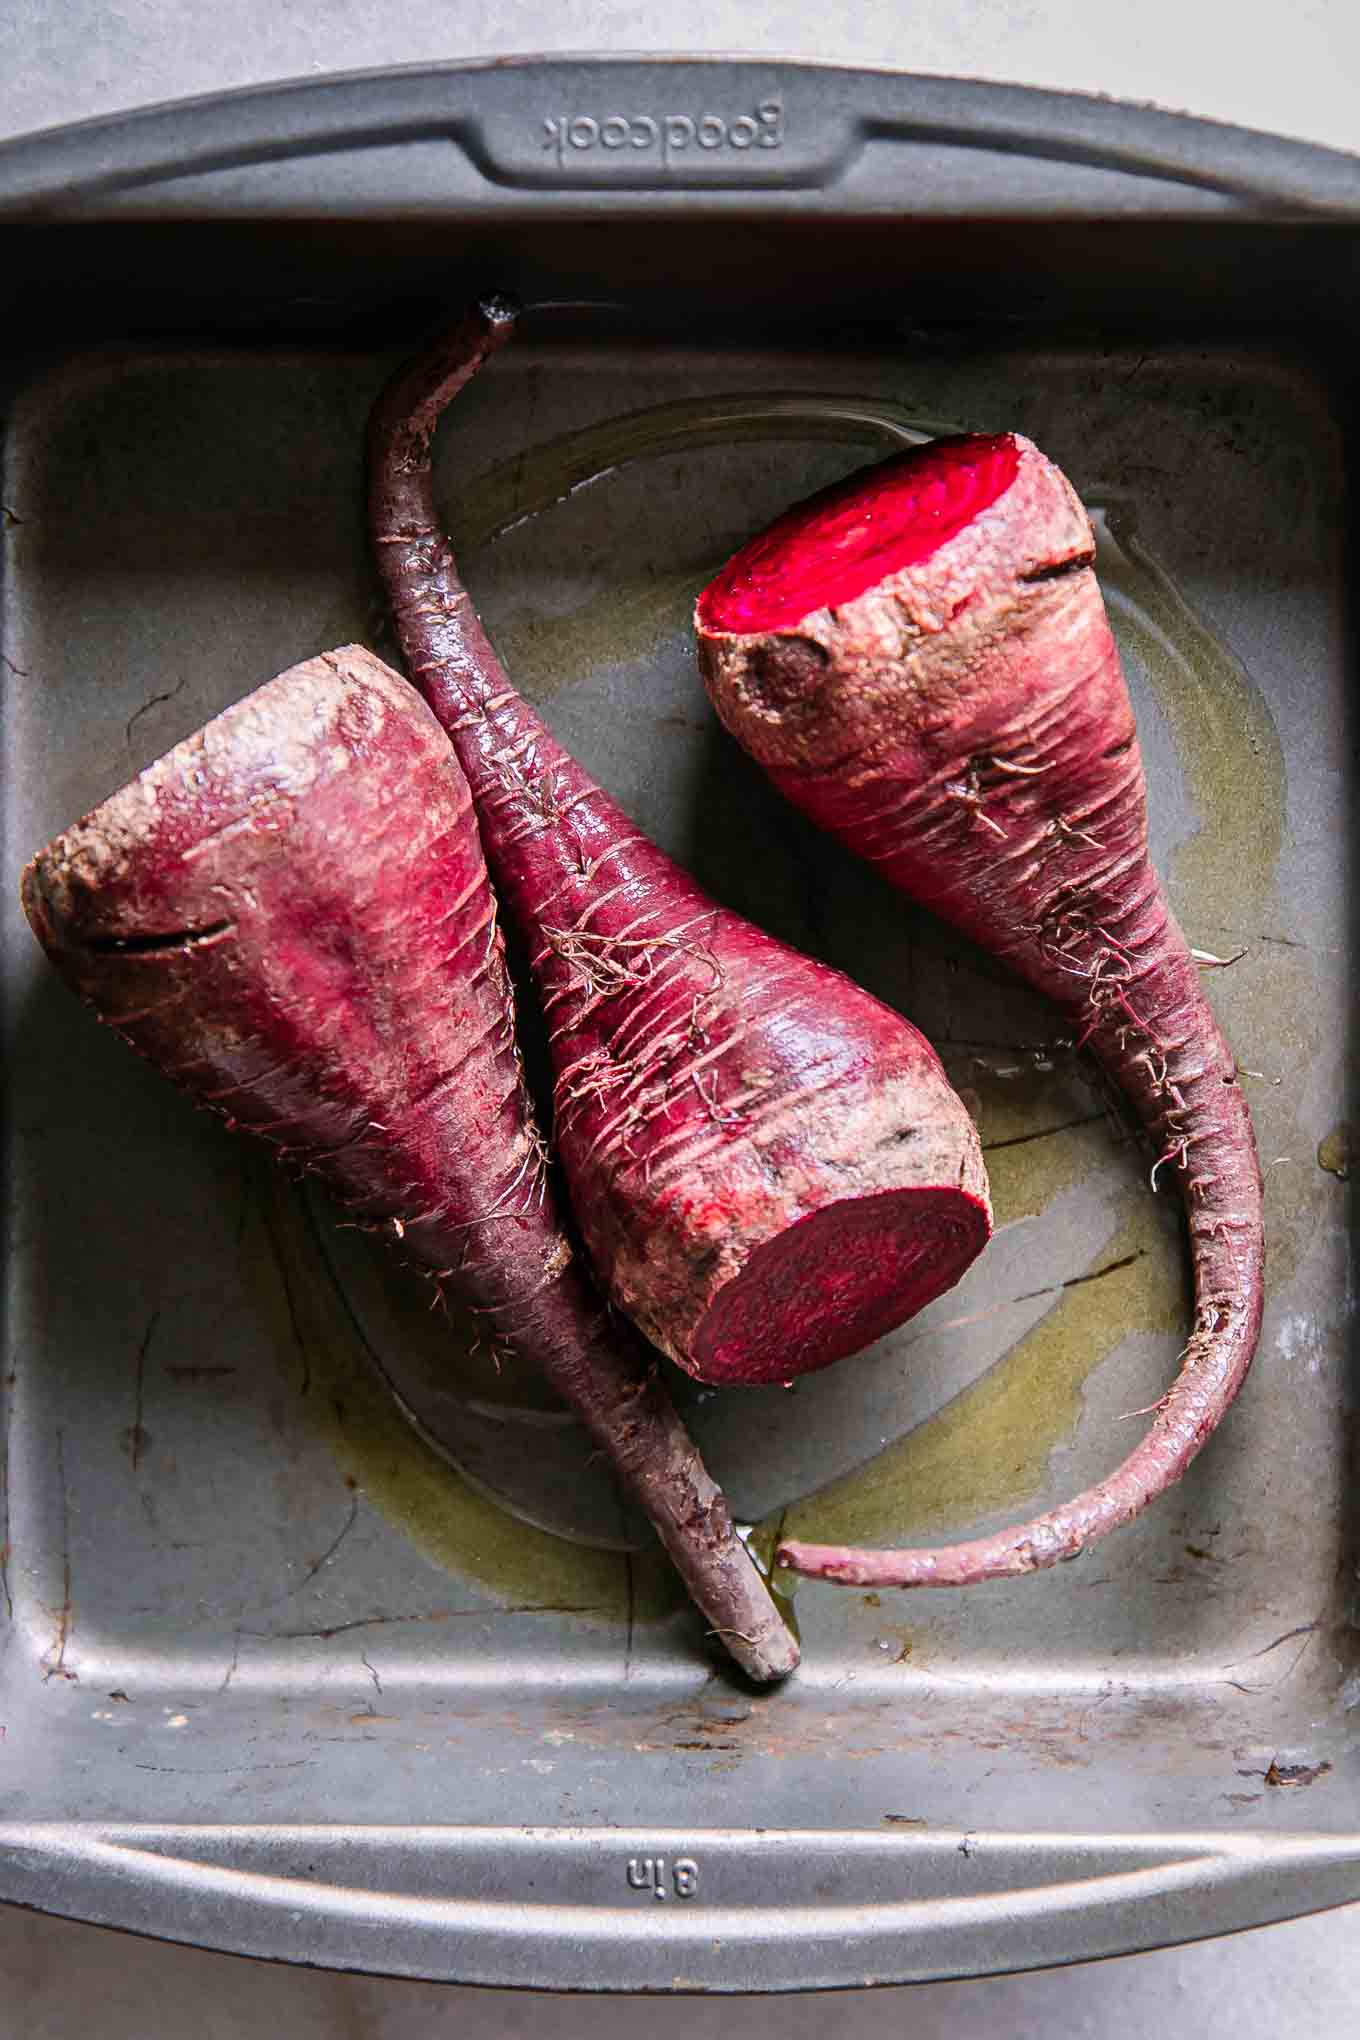 red beets inside a roasting pan before baking